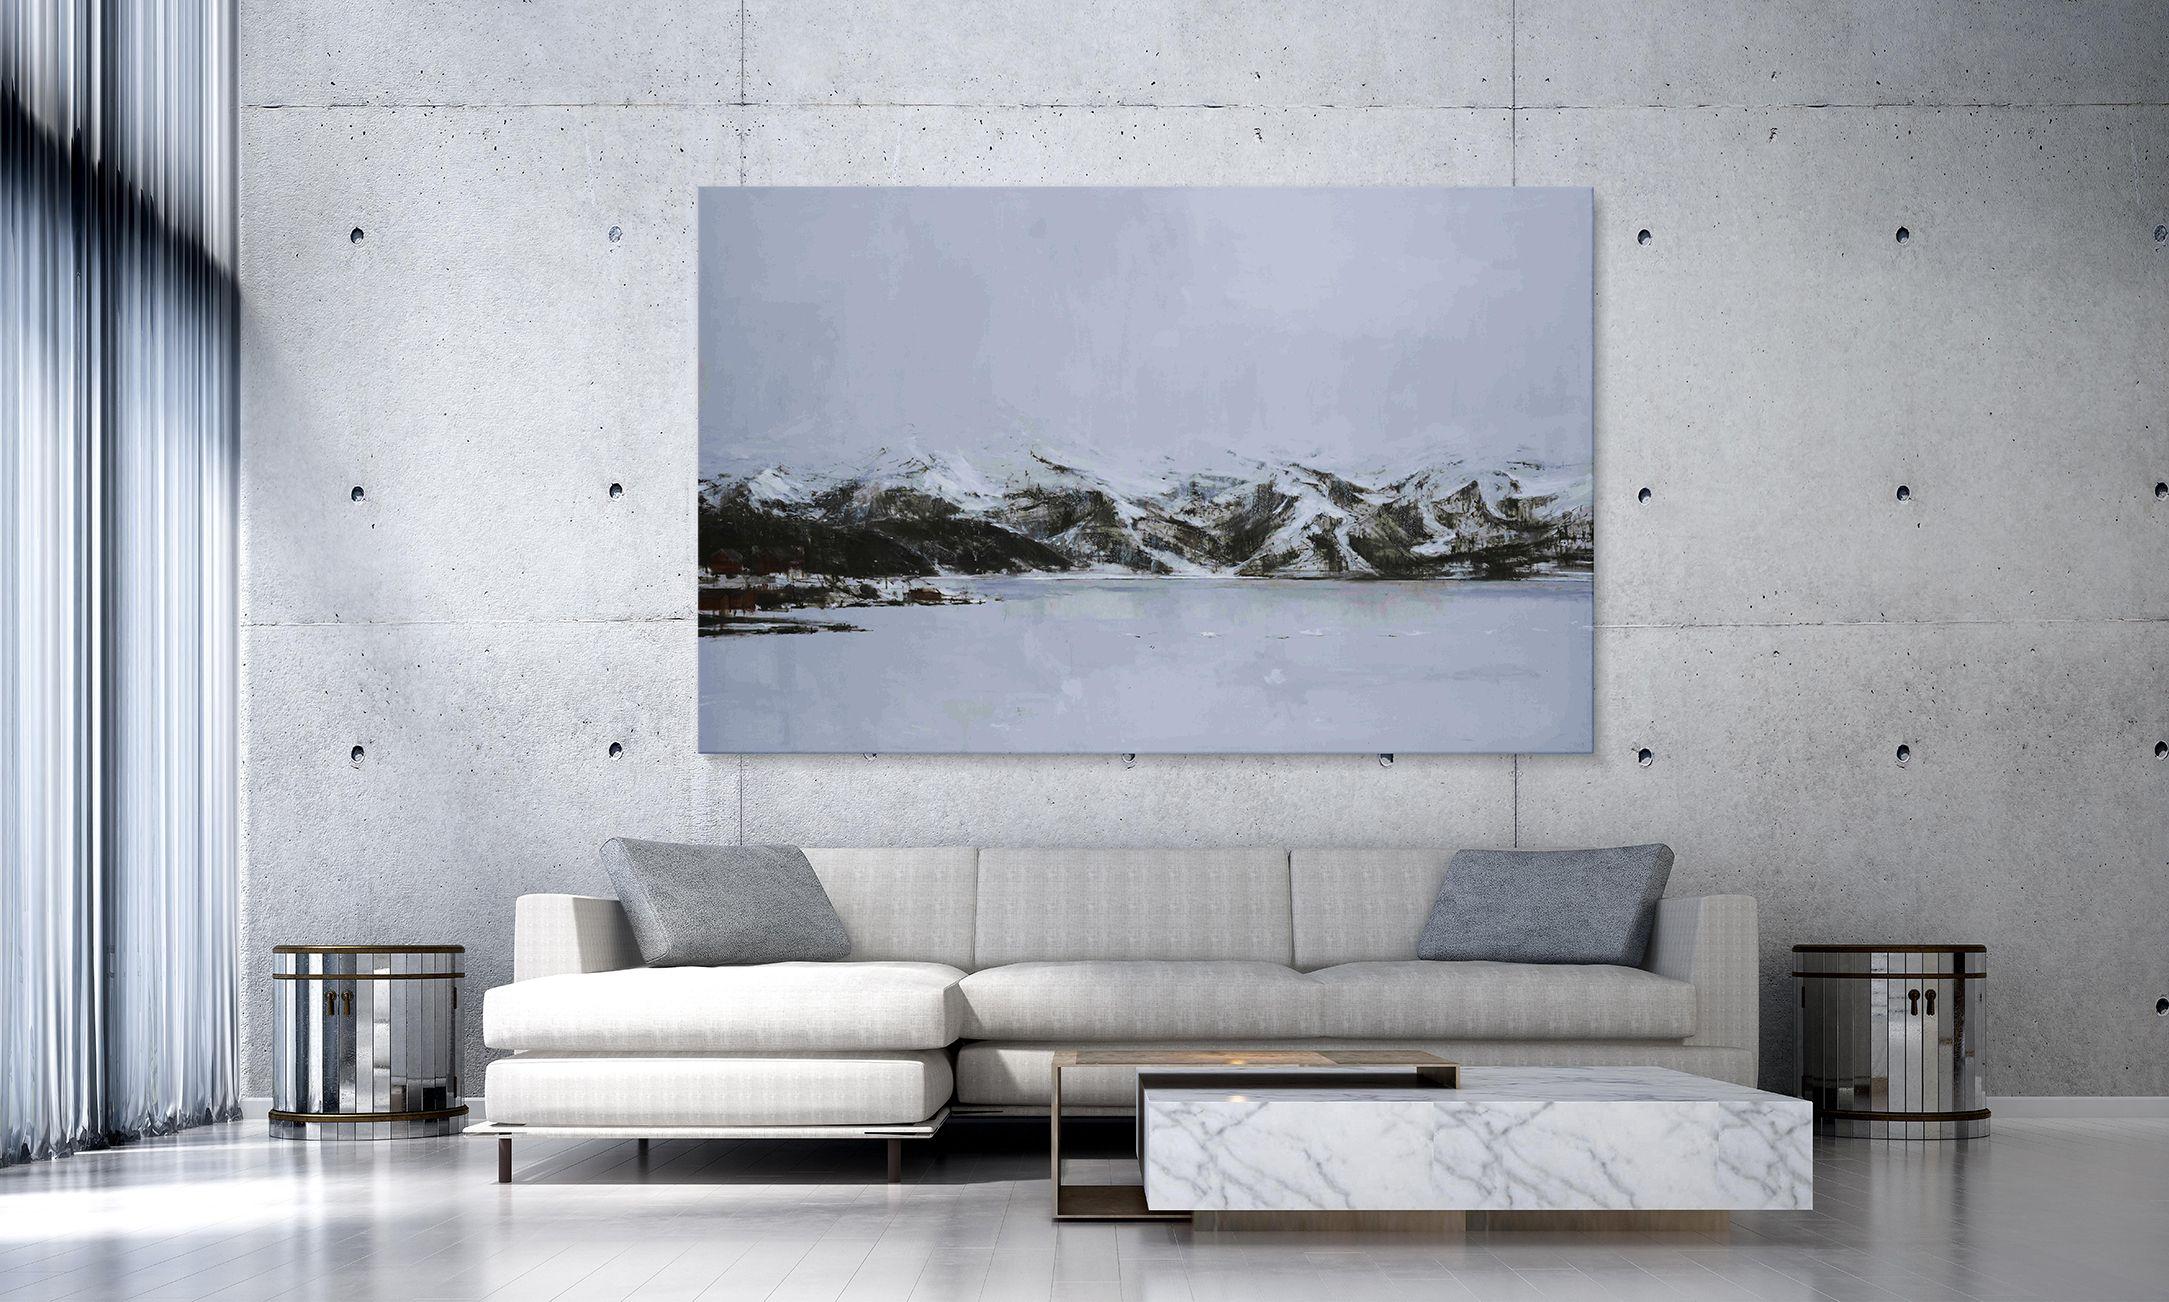 Hardangervidda #3 by Calo Carratalá - Landscape painting, snowy mountain, winter For Sale 1